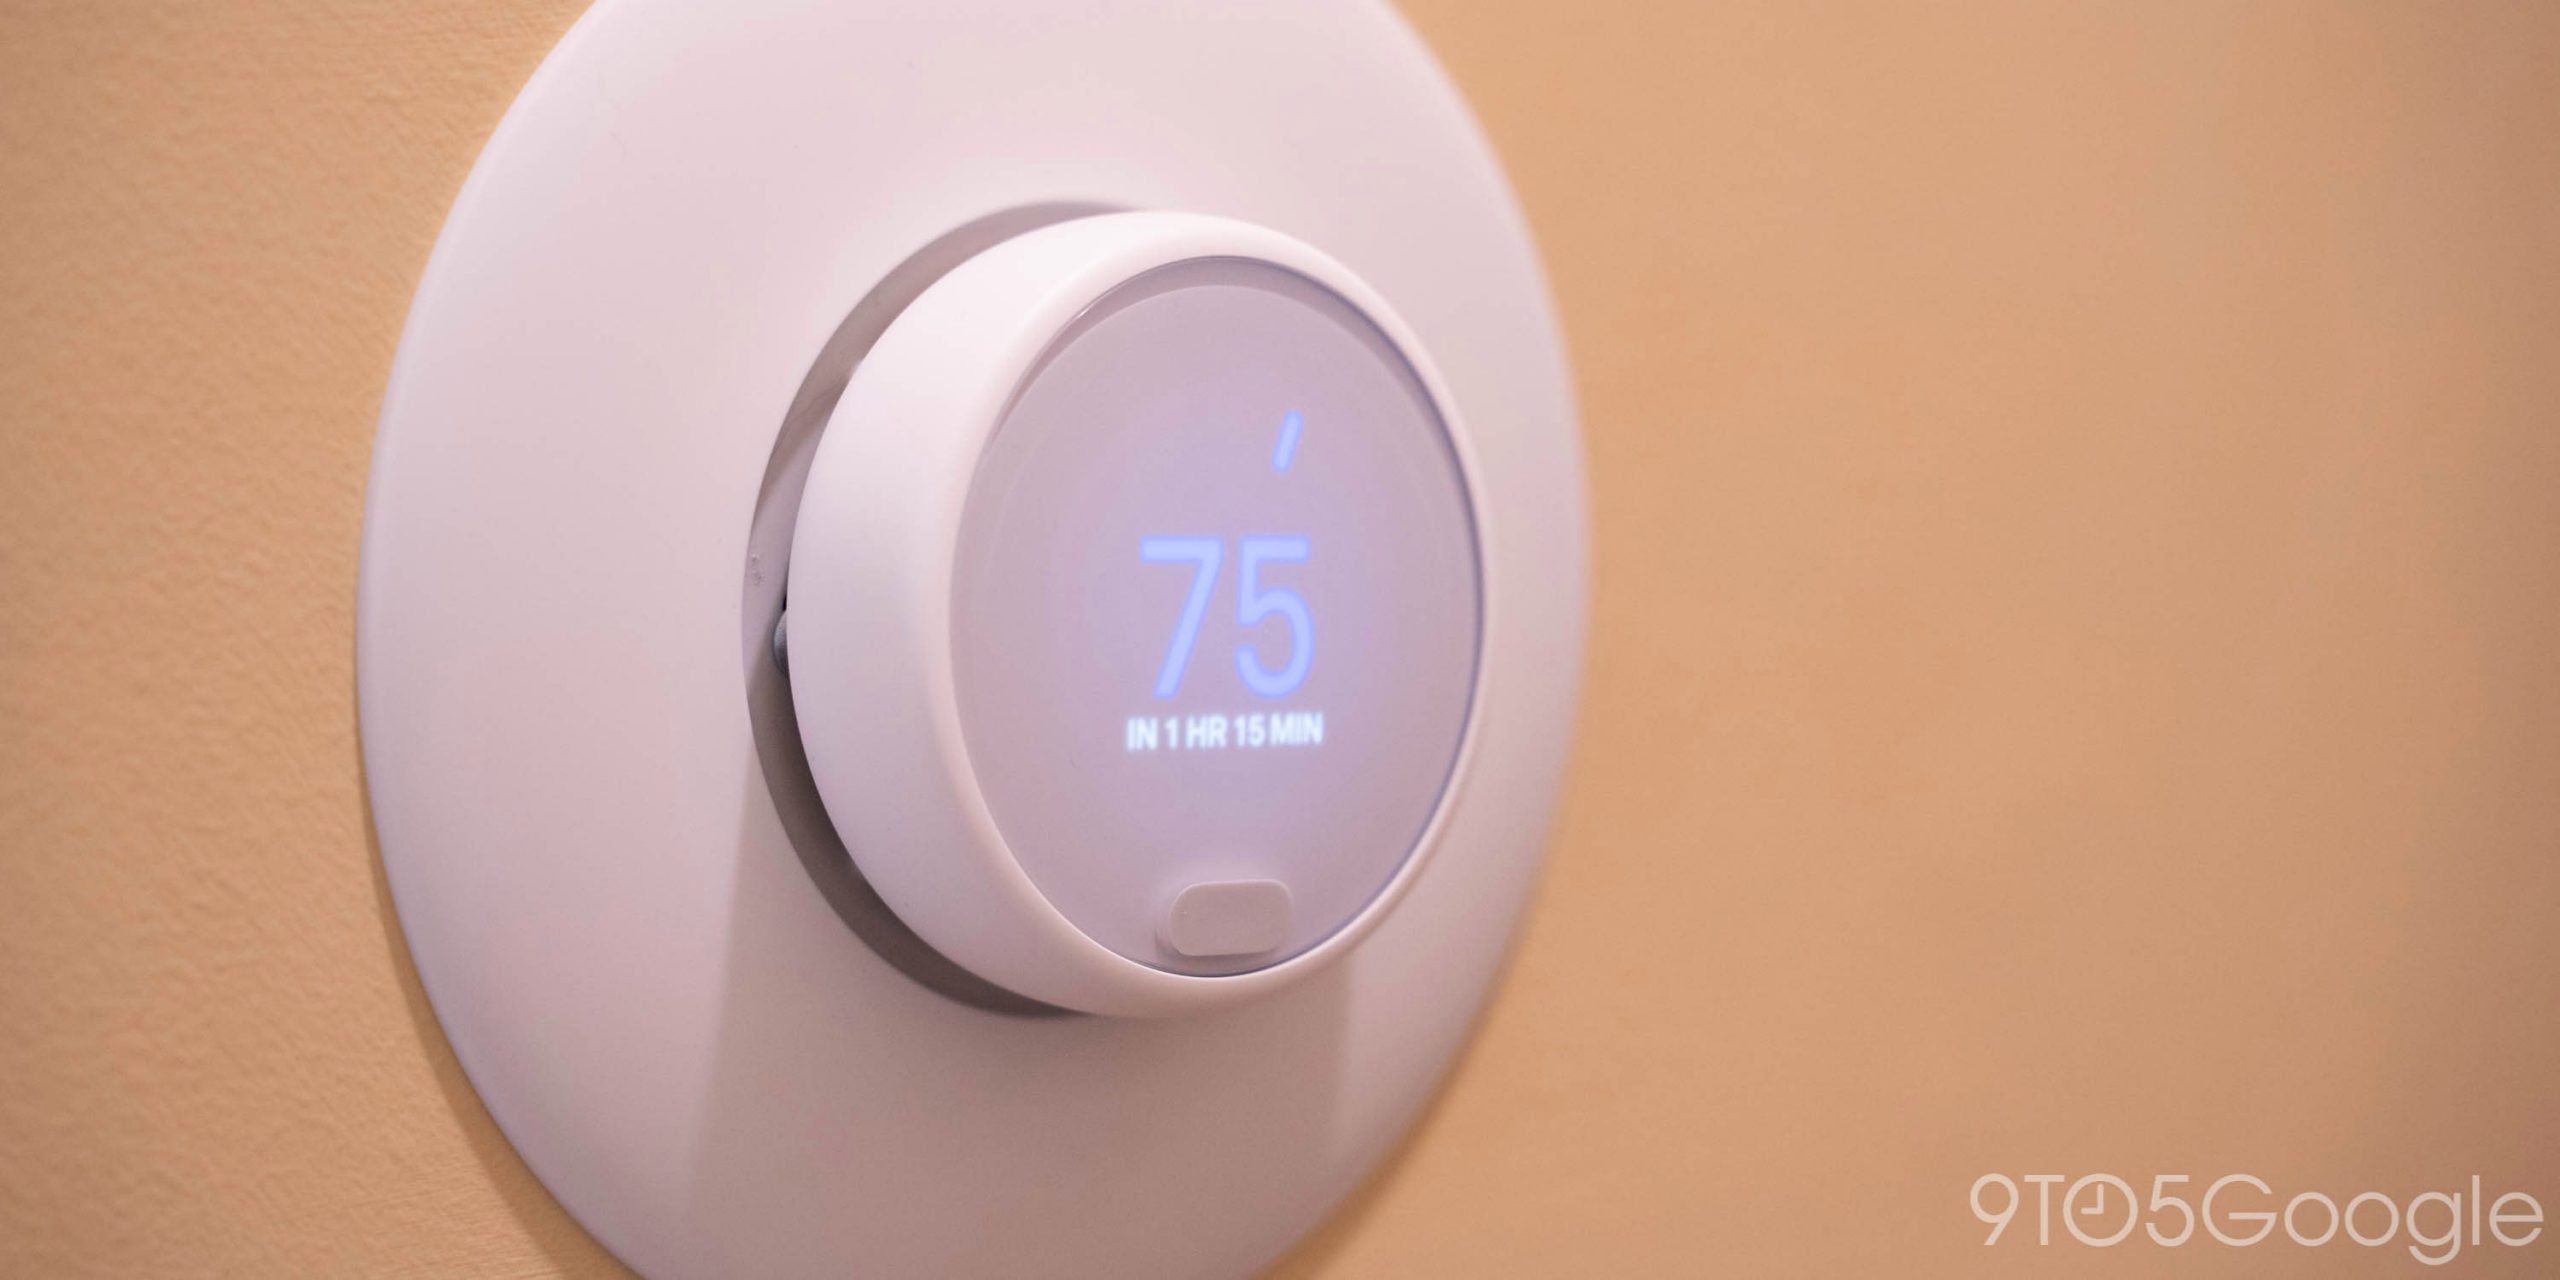 Nest 'w5' error: Google will issue free thermostat replacement